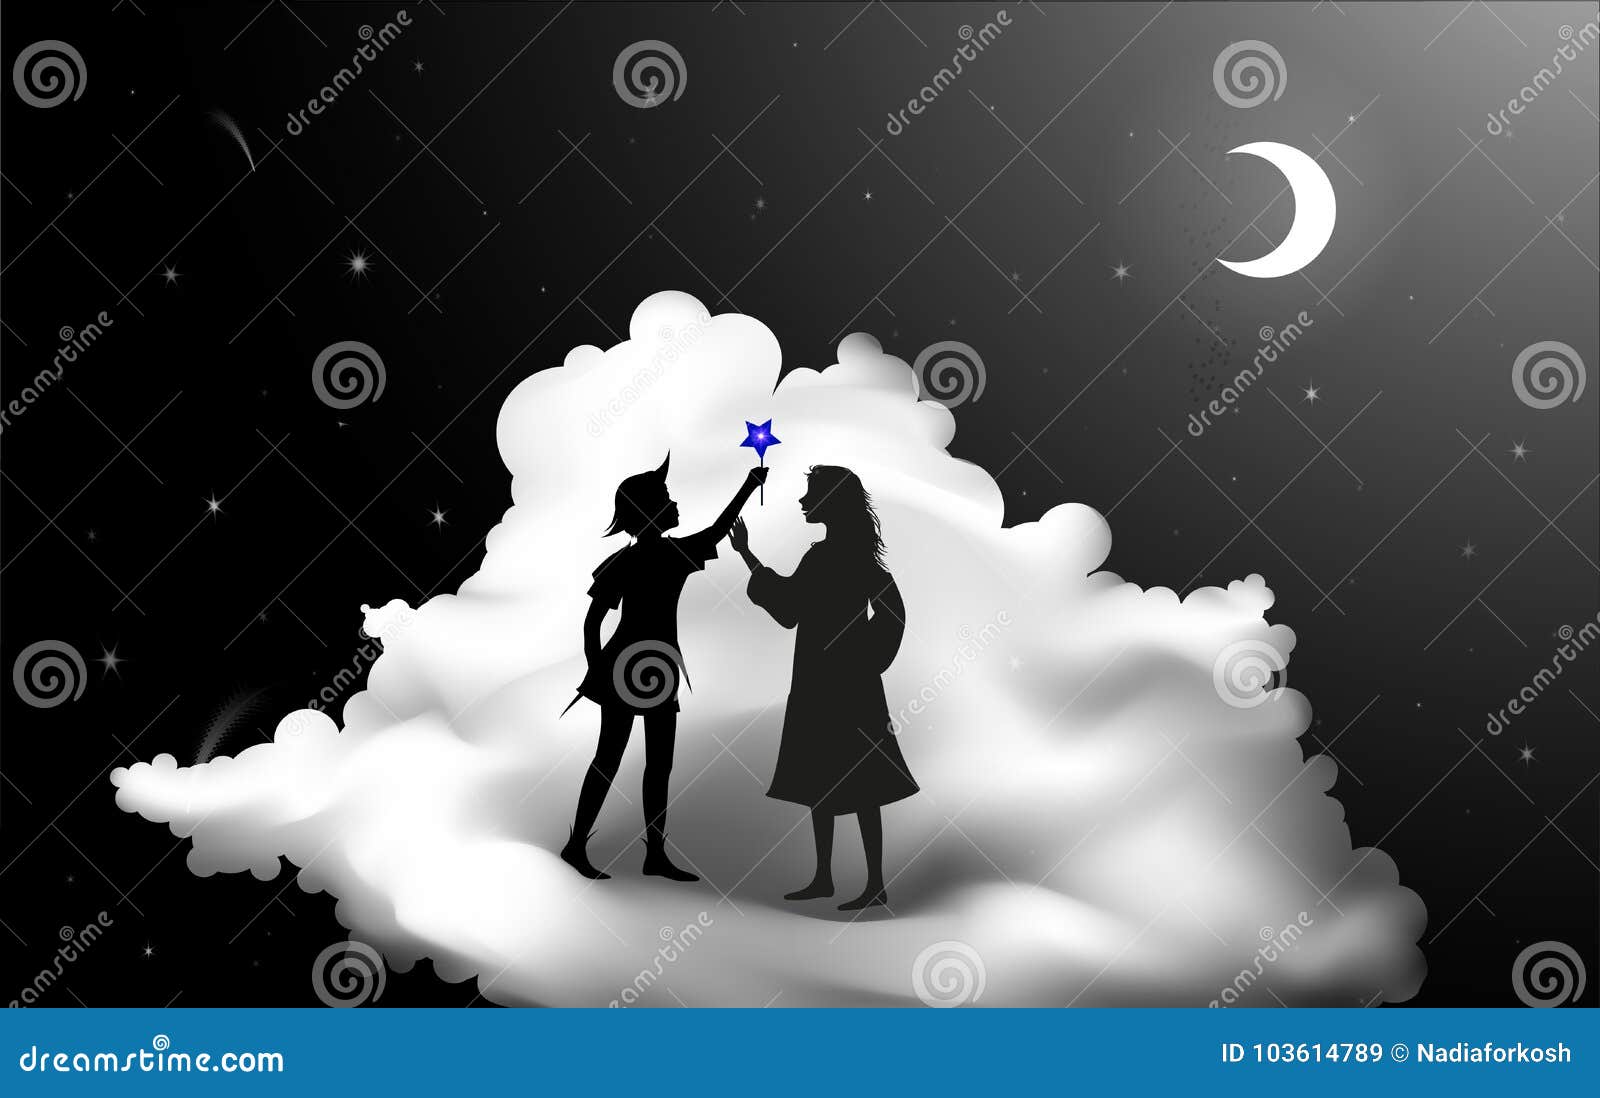 peter pan story, peter pan and wendy standing on the cloud, fairy night,